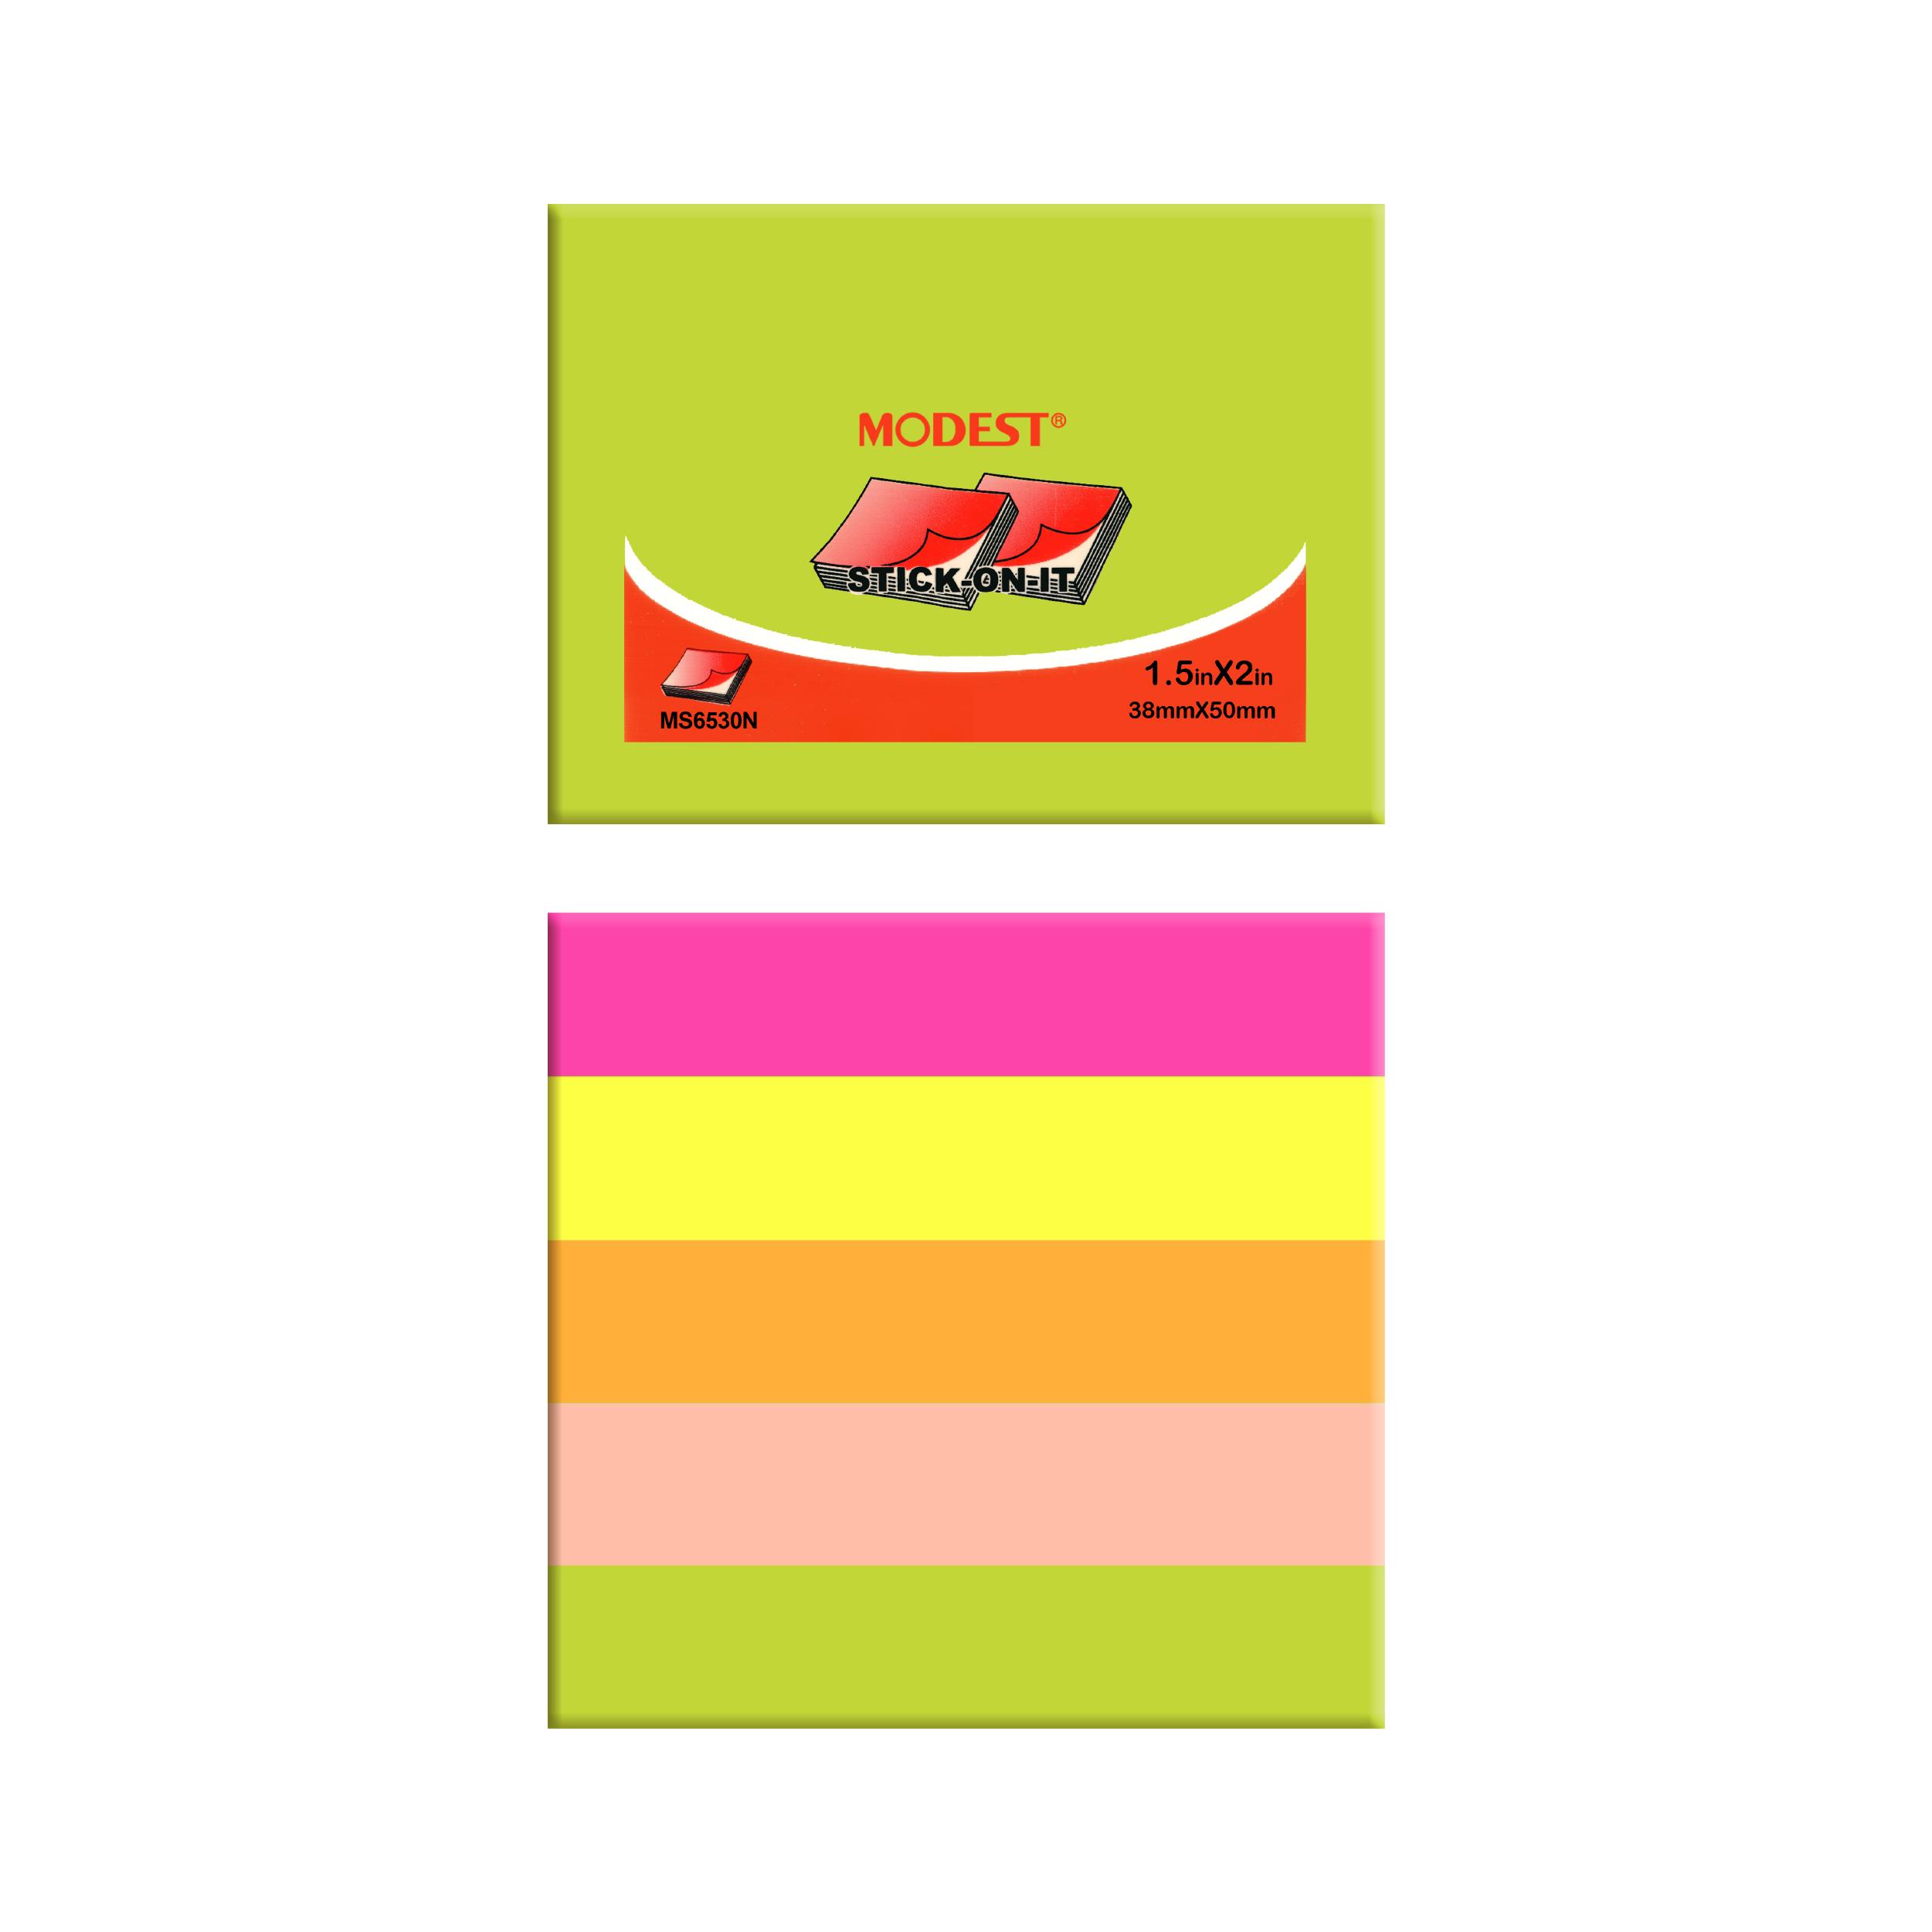 MODEST STICK-ON-IT Sticky Notes, 1.5" x 2", Assorted, 500Sheets/Cube (MS 6530 N)